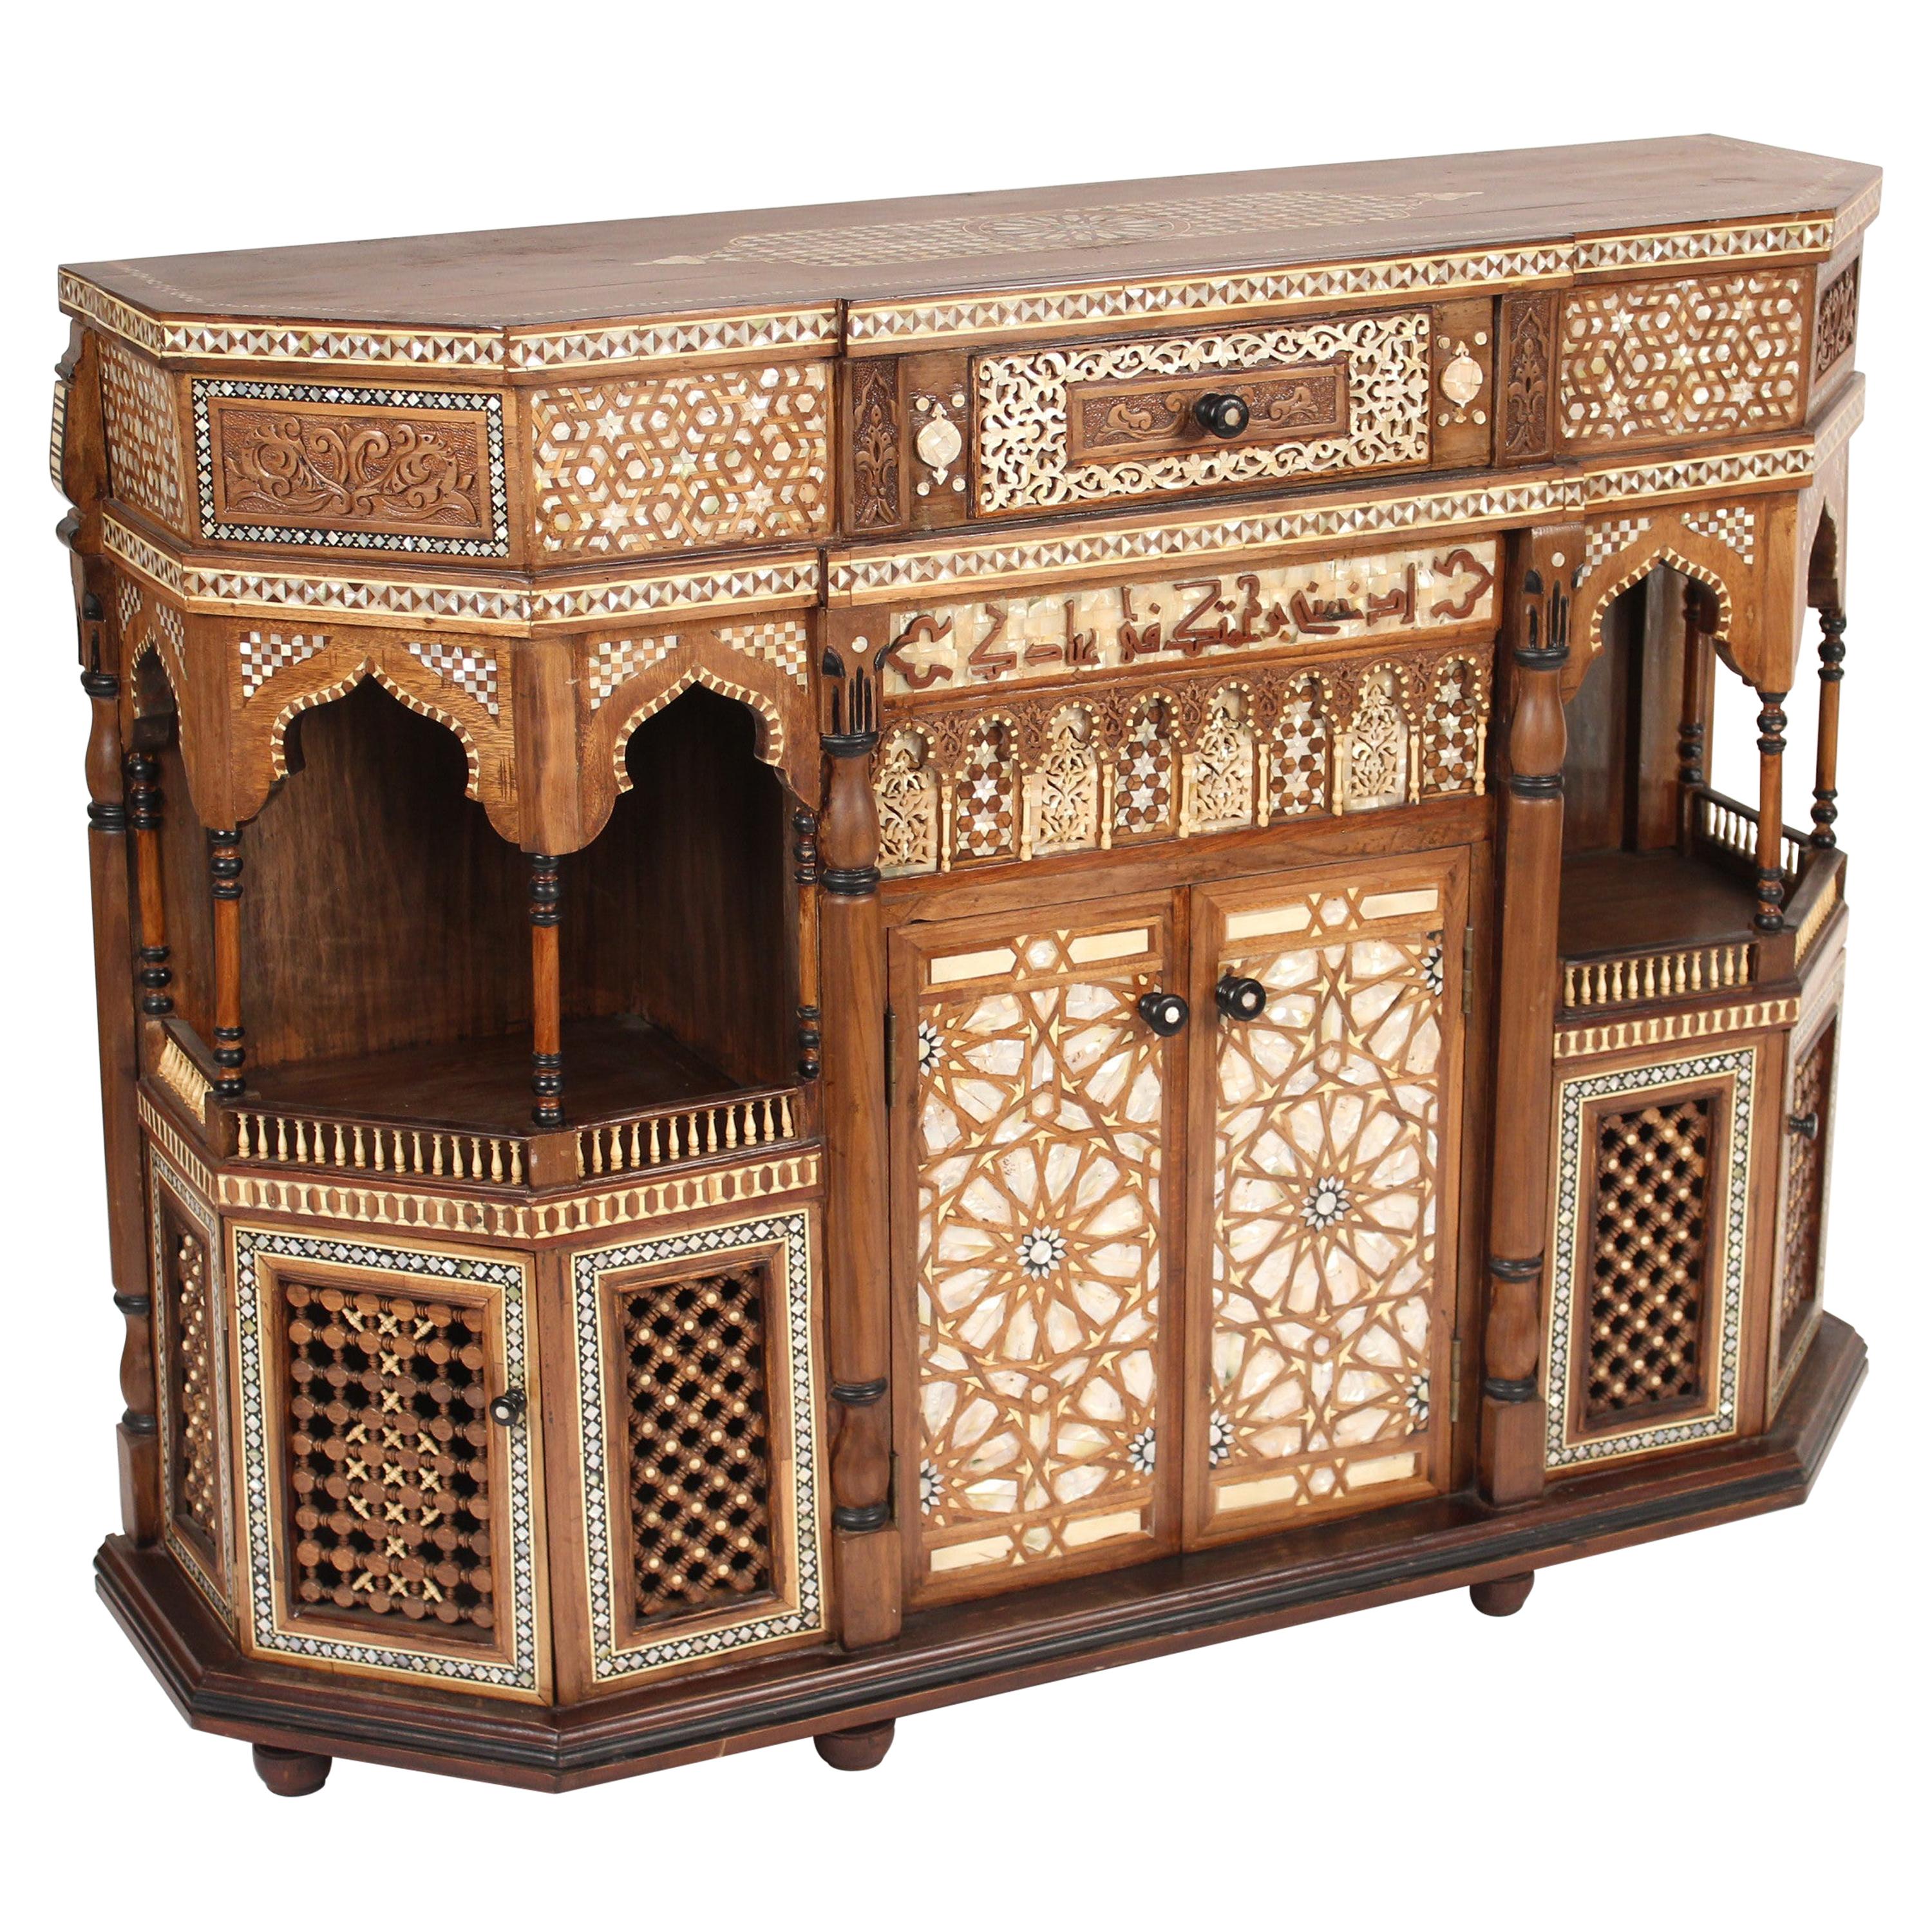 Mother of Pearl Inlaid Middle Eastern Cabinet